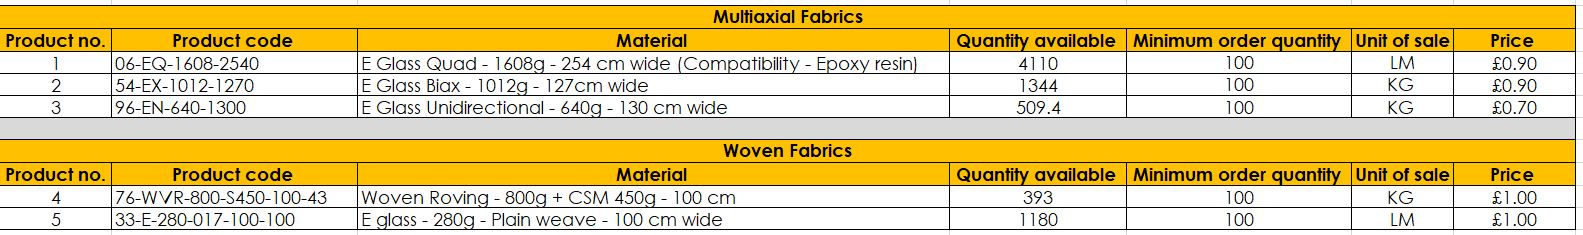 Composite material offer